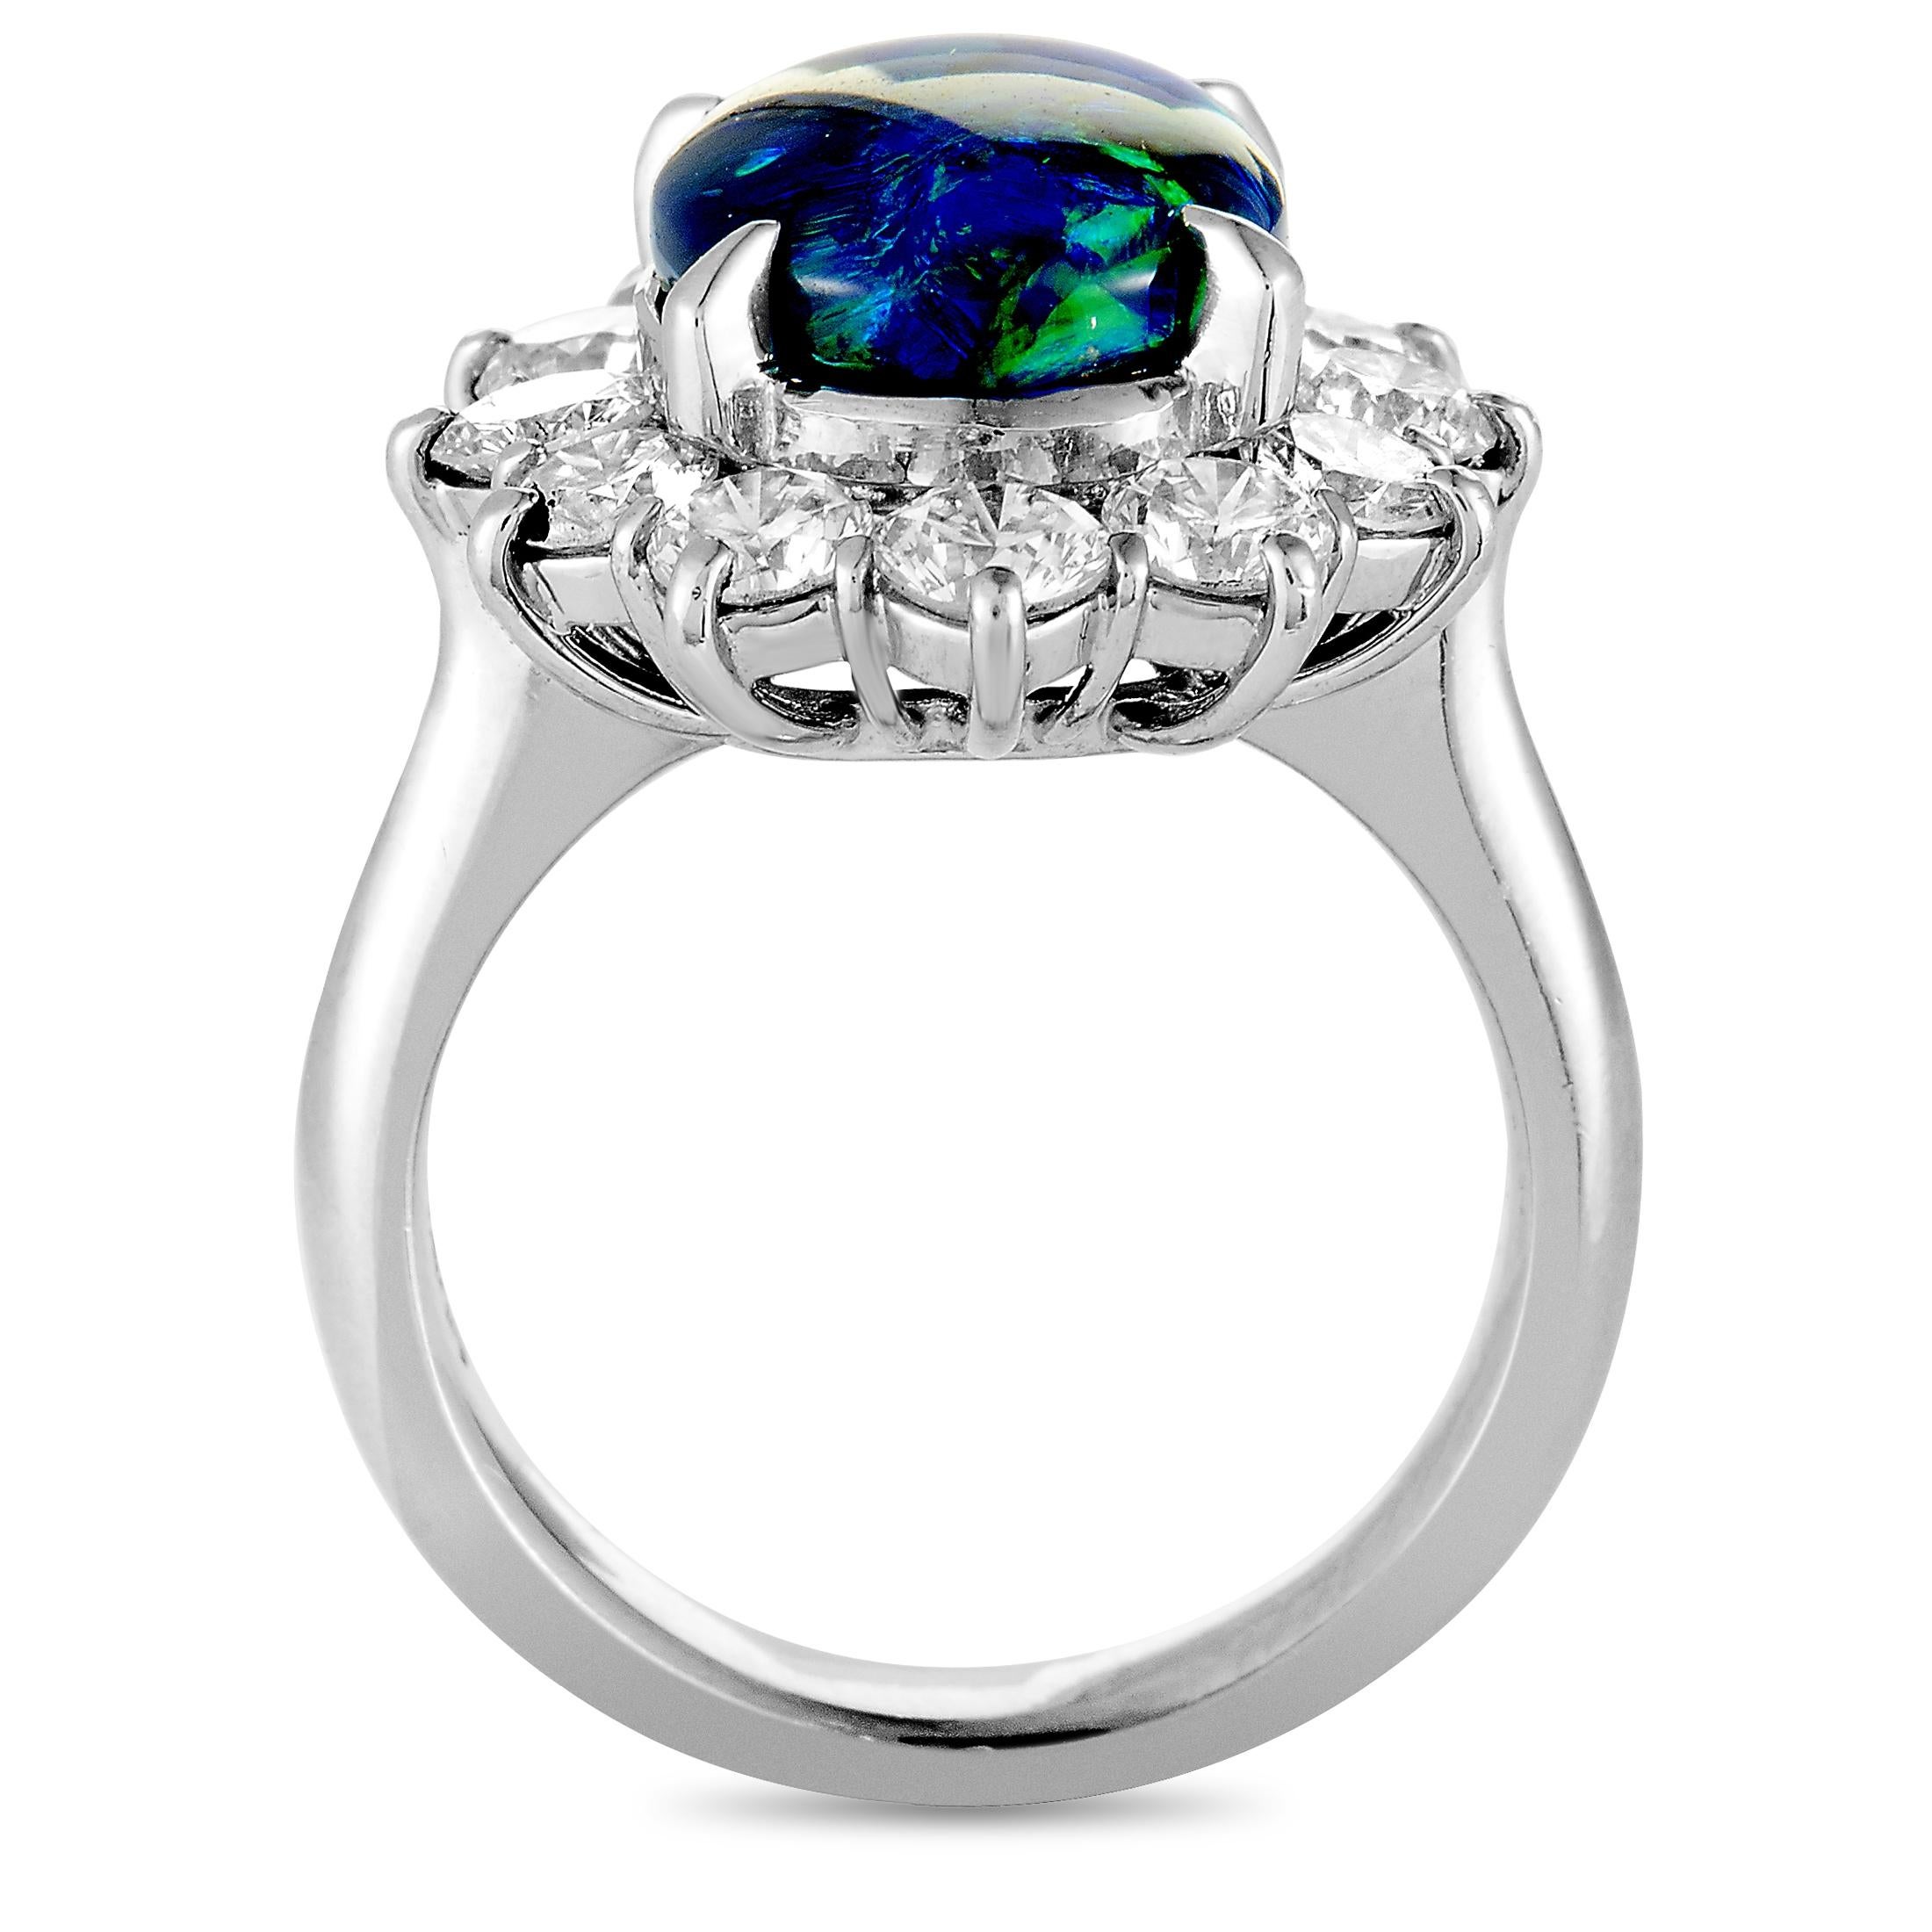 This ring is made of platinum and weighs 10.7 grams. It boasts band thickness of 4 mm and top height of 9 mm, while top dimensions measure 17 by 19 mm. The ring is set with an opal that weighs 2.71 carats and with diamonds that total 1.91